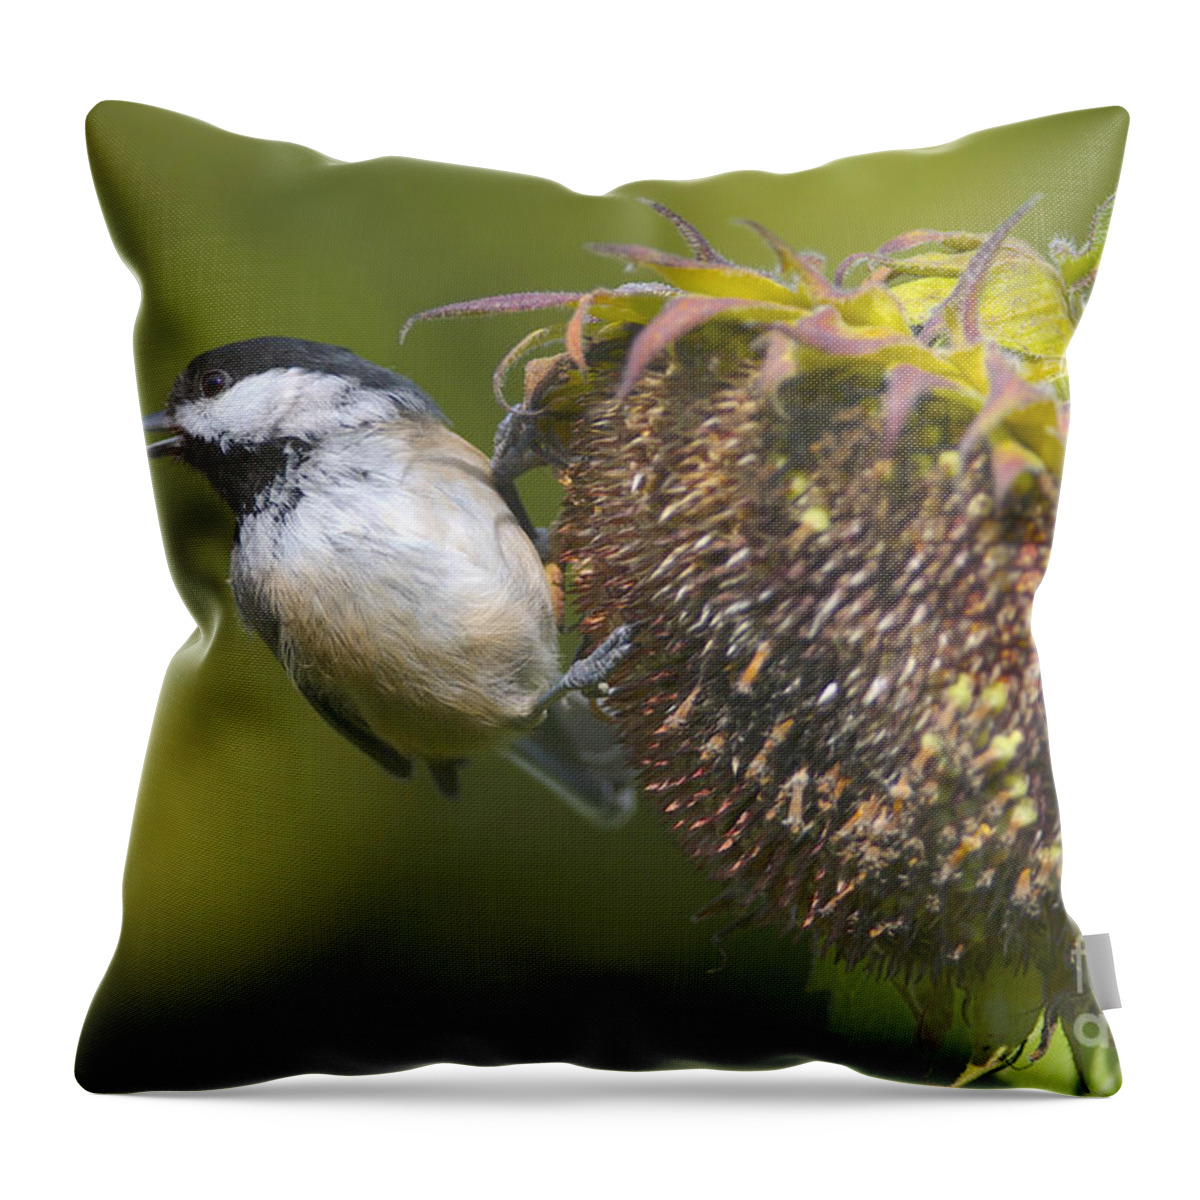 Black-capped Chickadee Throw Pillow featuring the photograph Tasty Treat by Sharon Talson